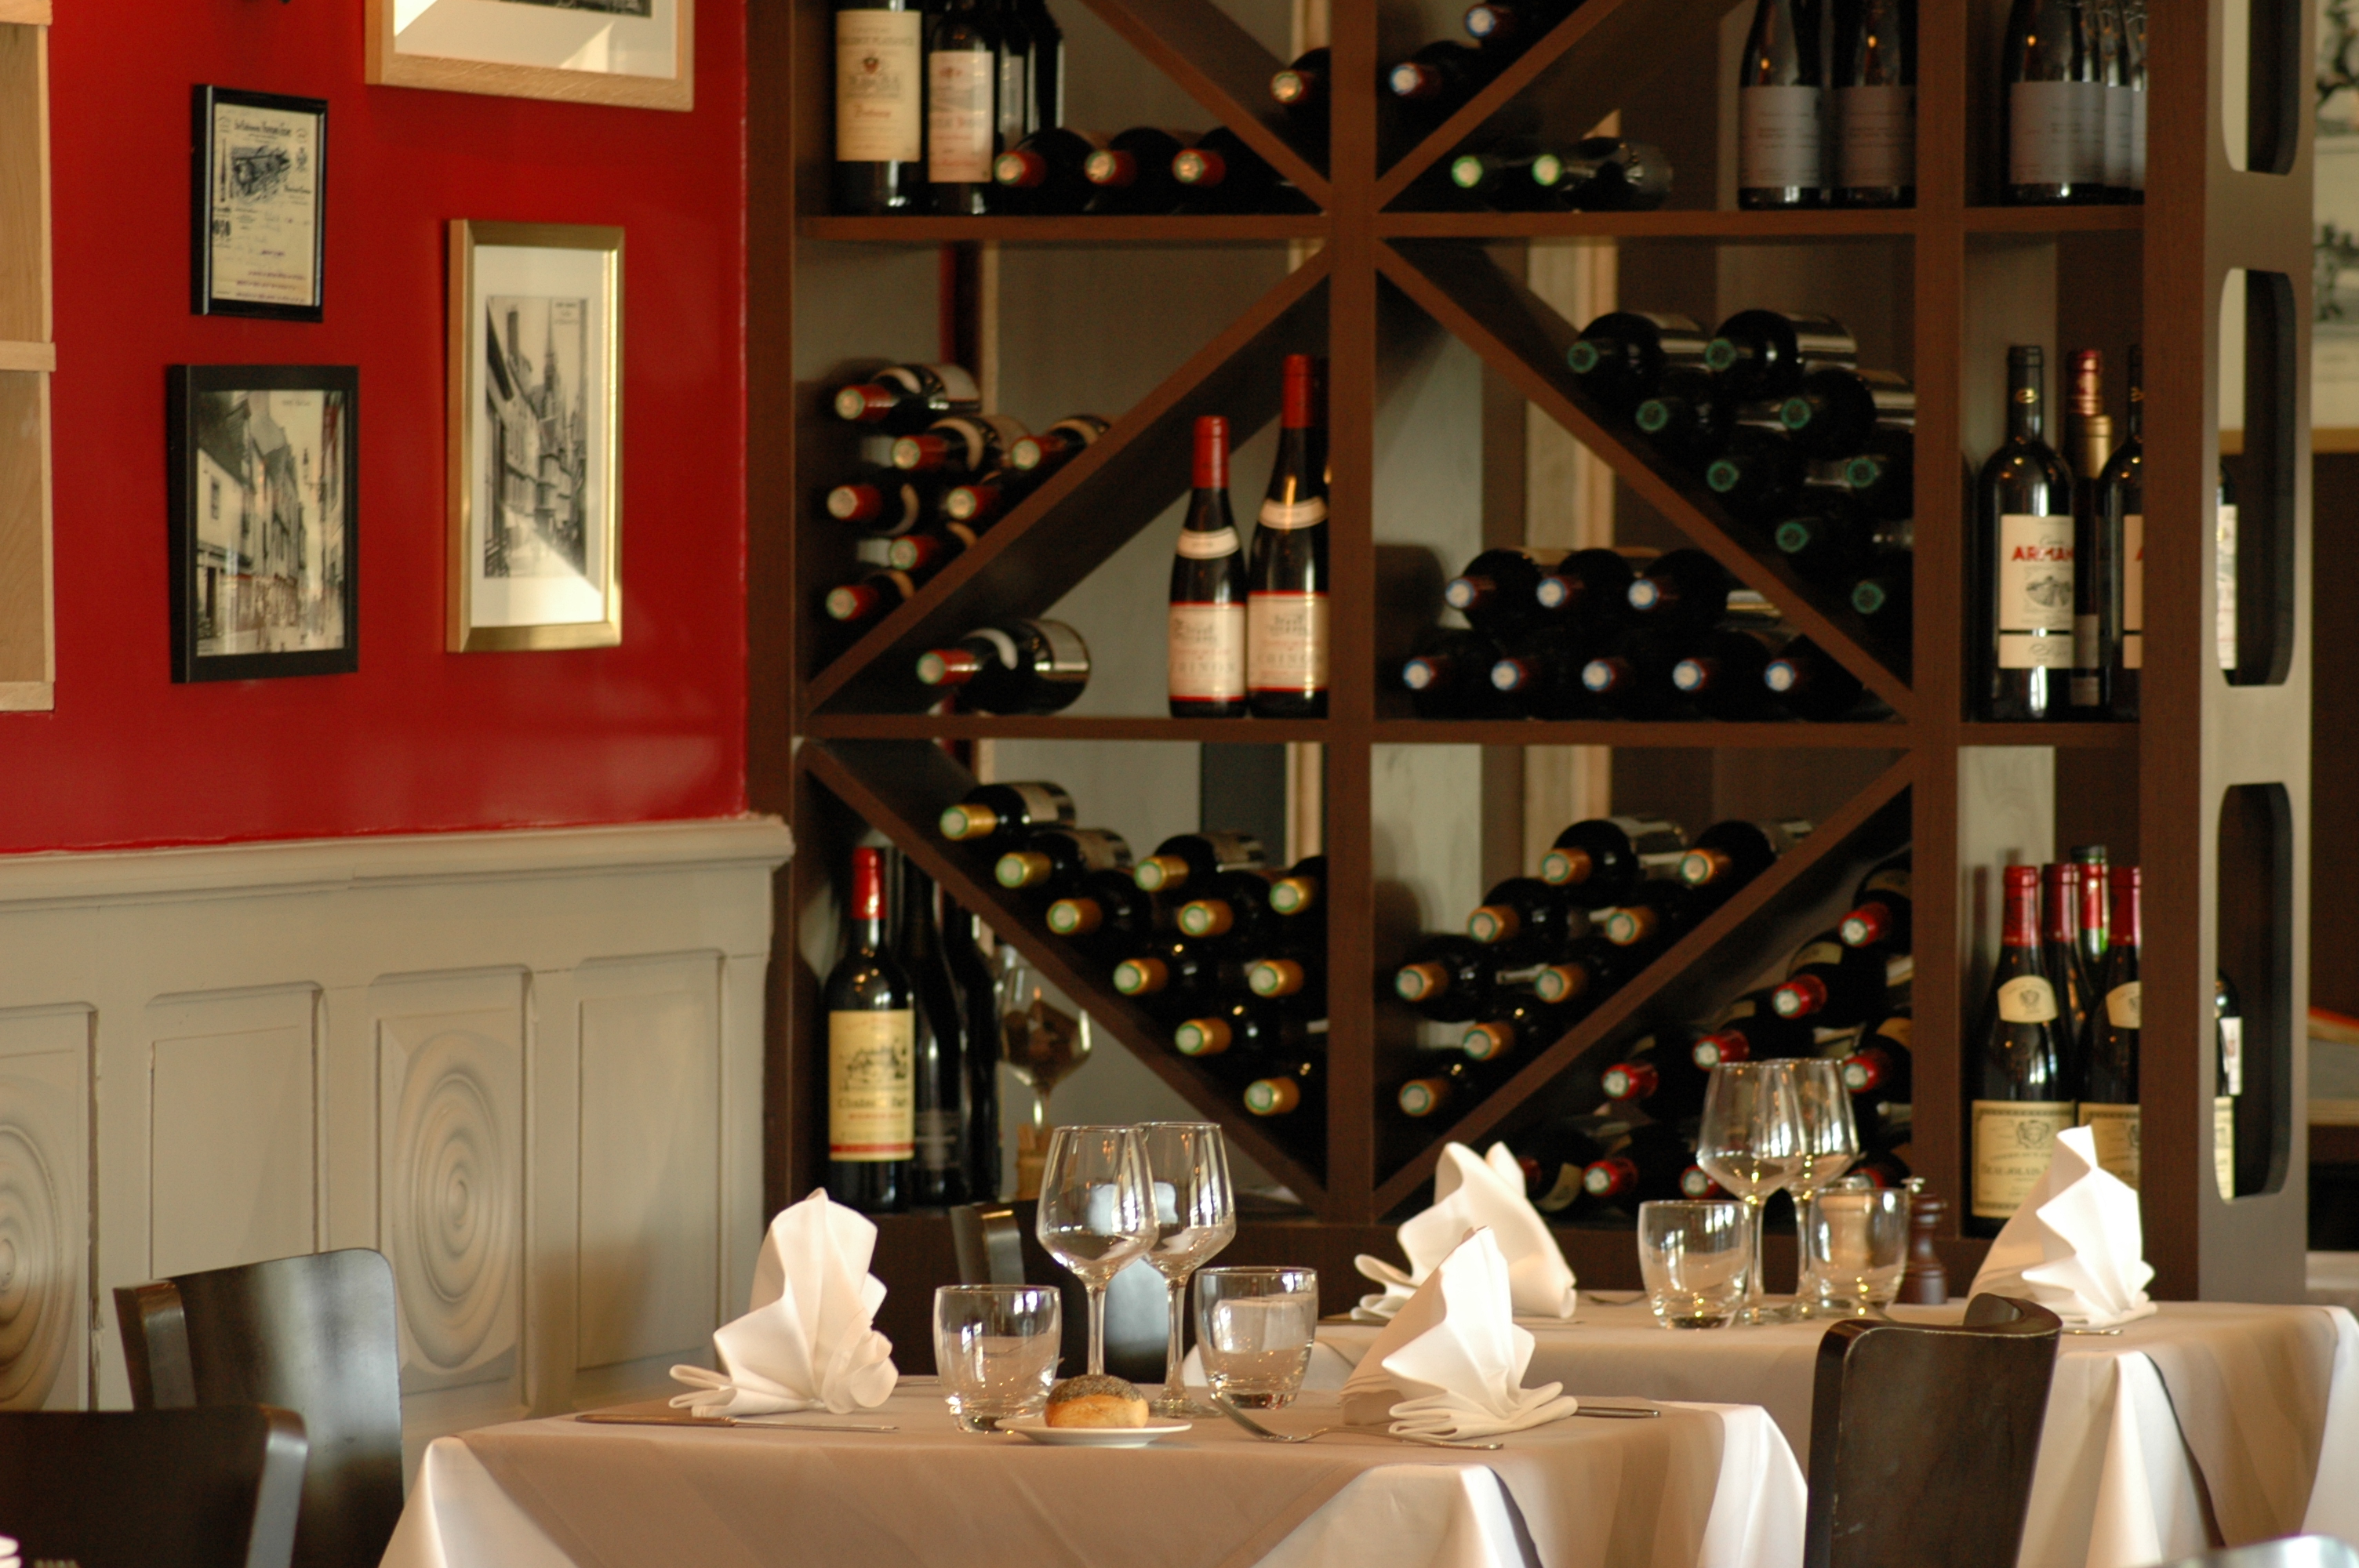 HOTEL-RESTAURANT IN VANNES, THE FULL OF FLAVORS FOR A SINGLE STAY